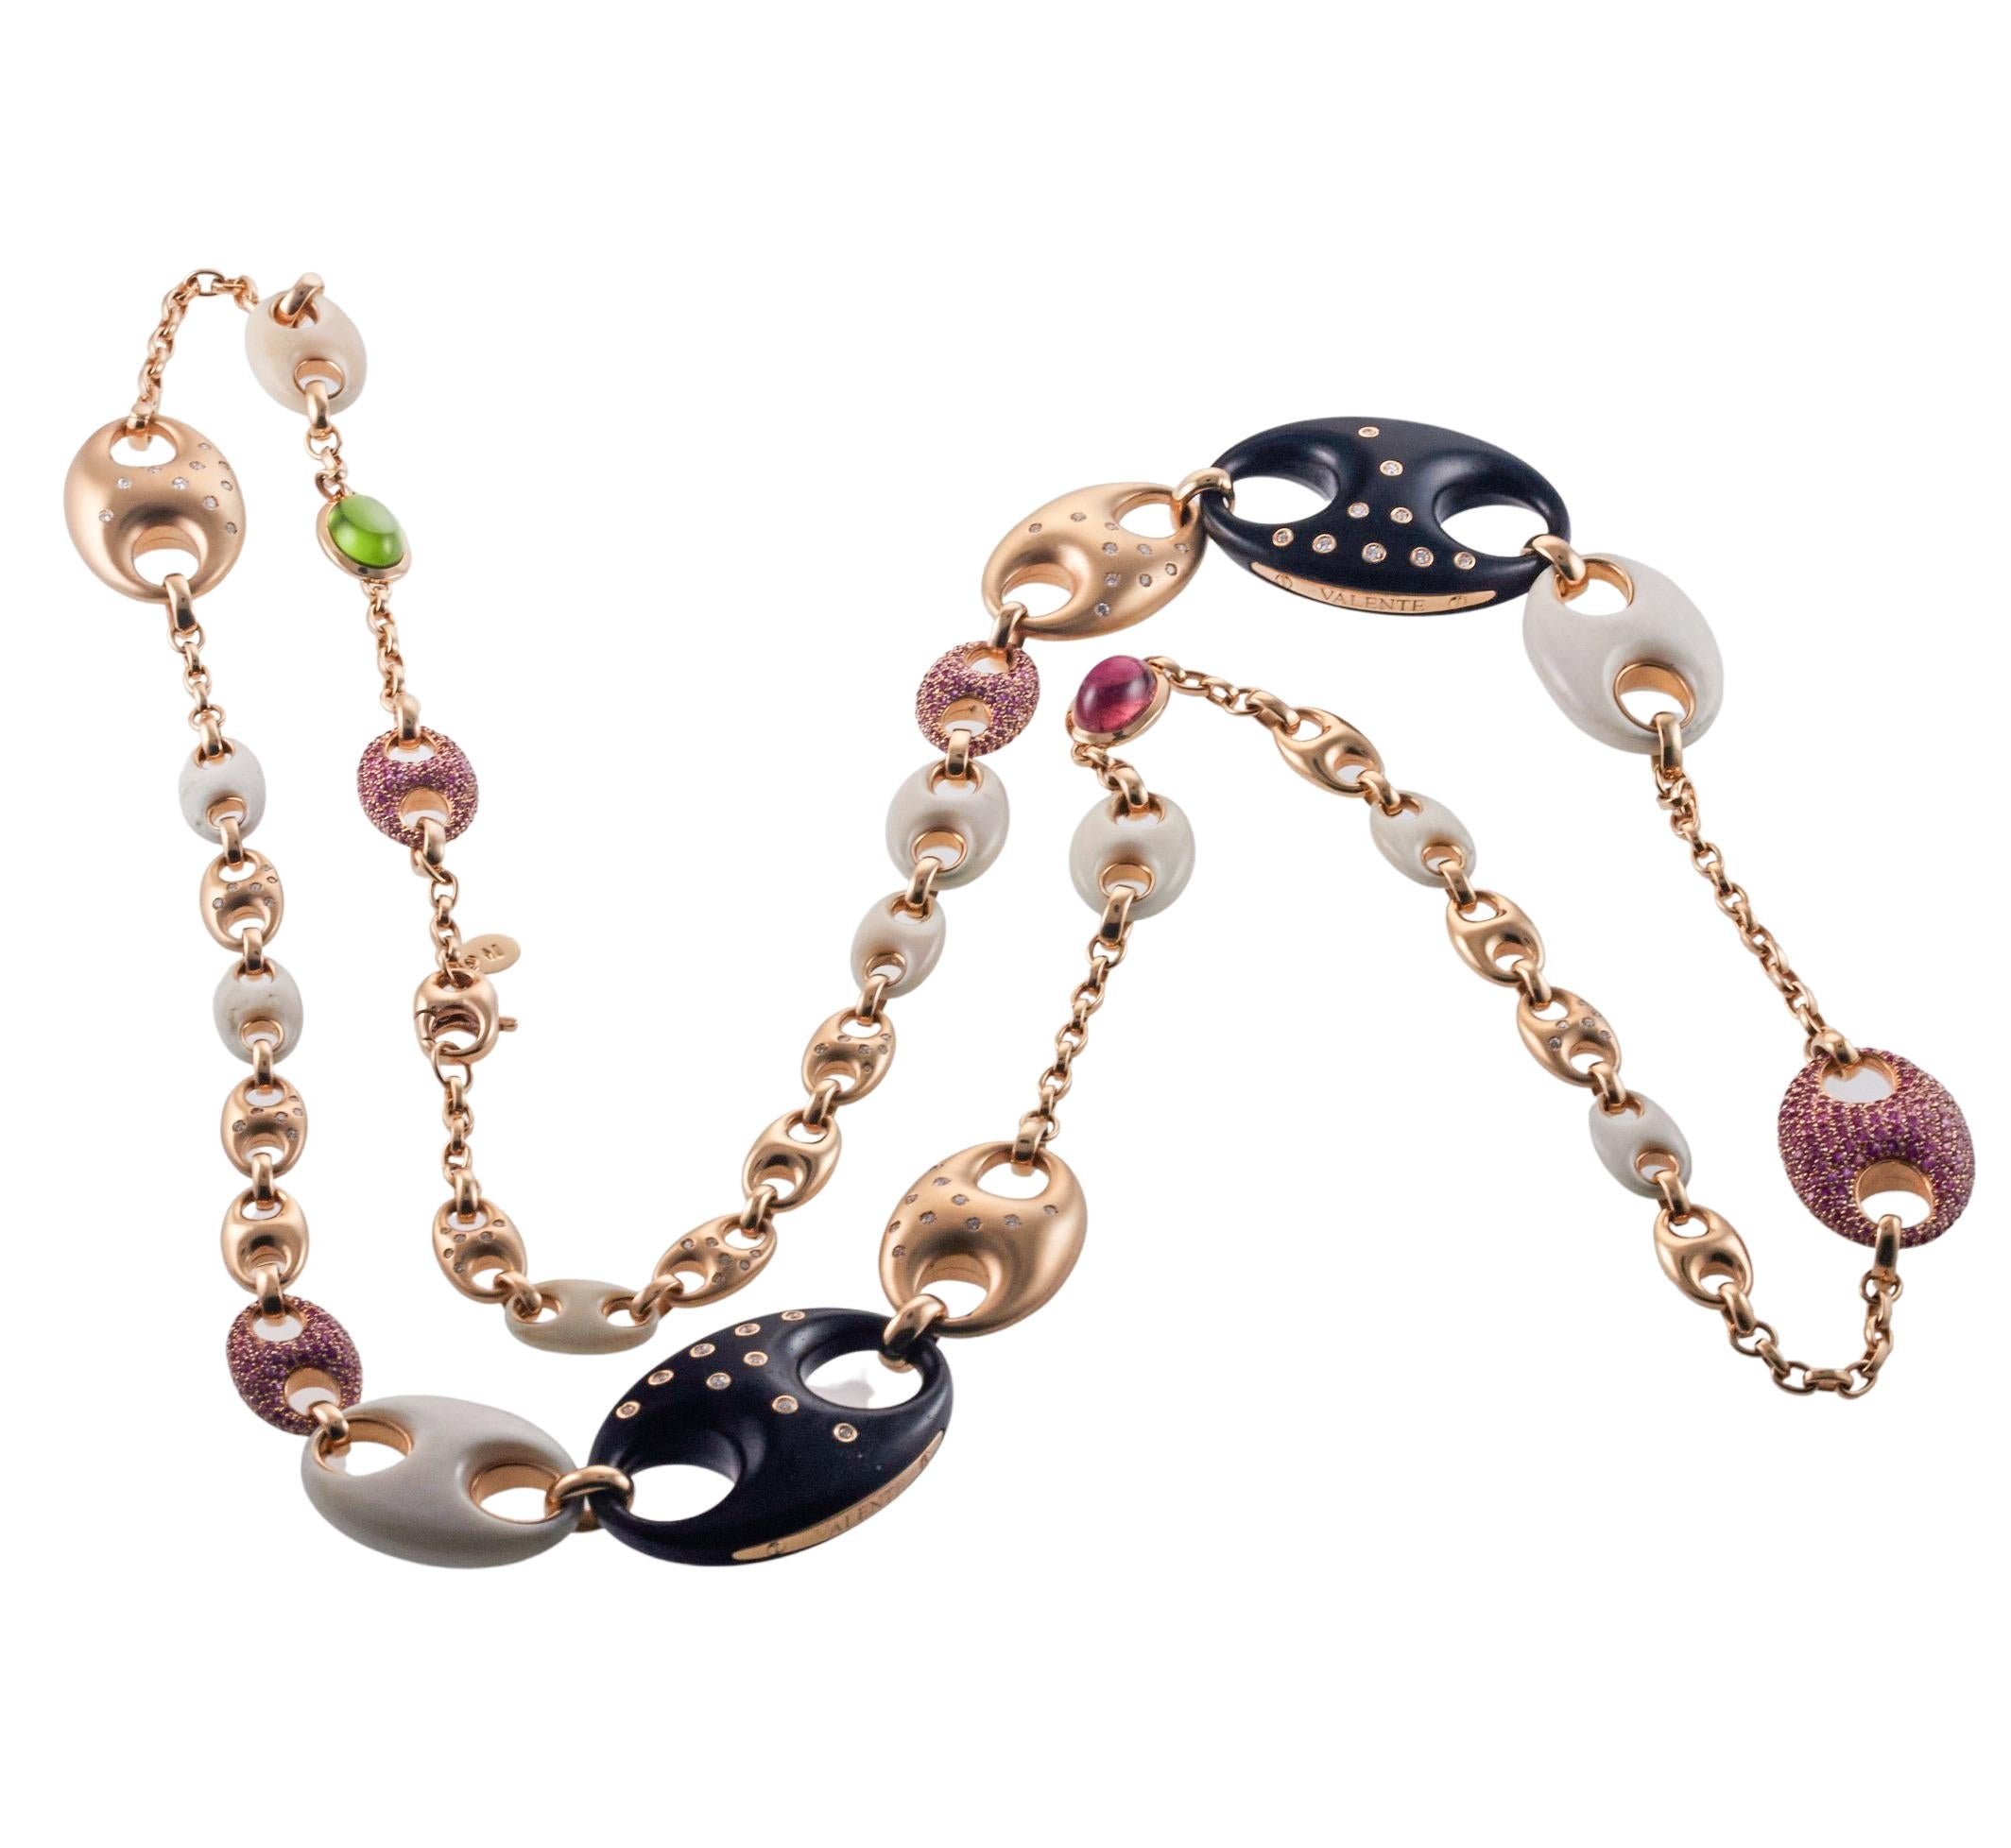 18k rose gold and wood station necklace by Valente, elaborated with pink sapphires, green and pink tourmalines, approx. 1.50ctw in VS/G diamonds. Necklace measures 46